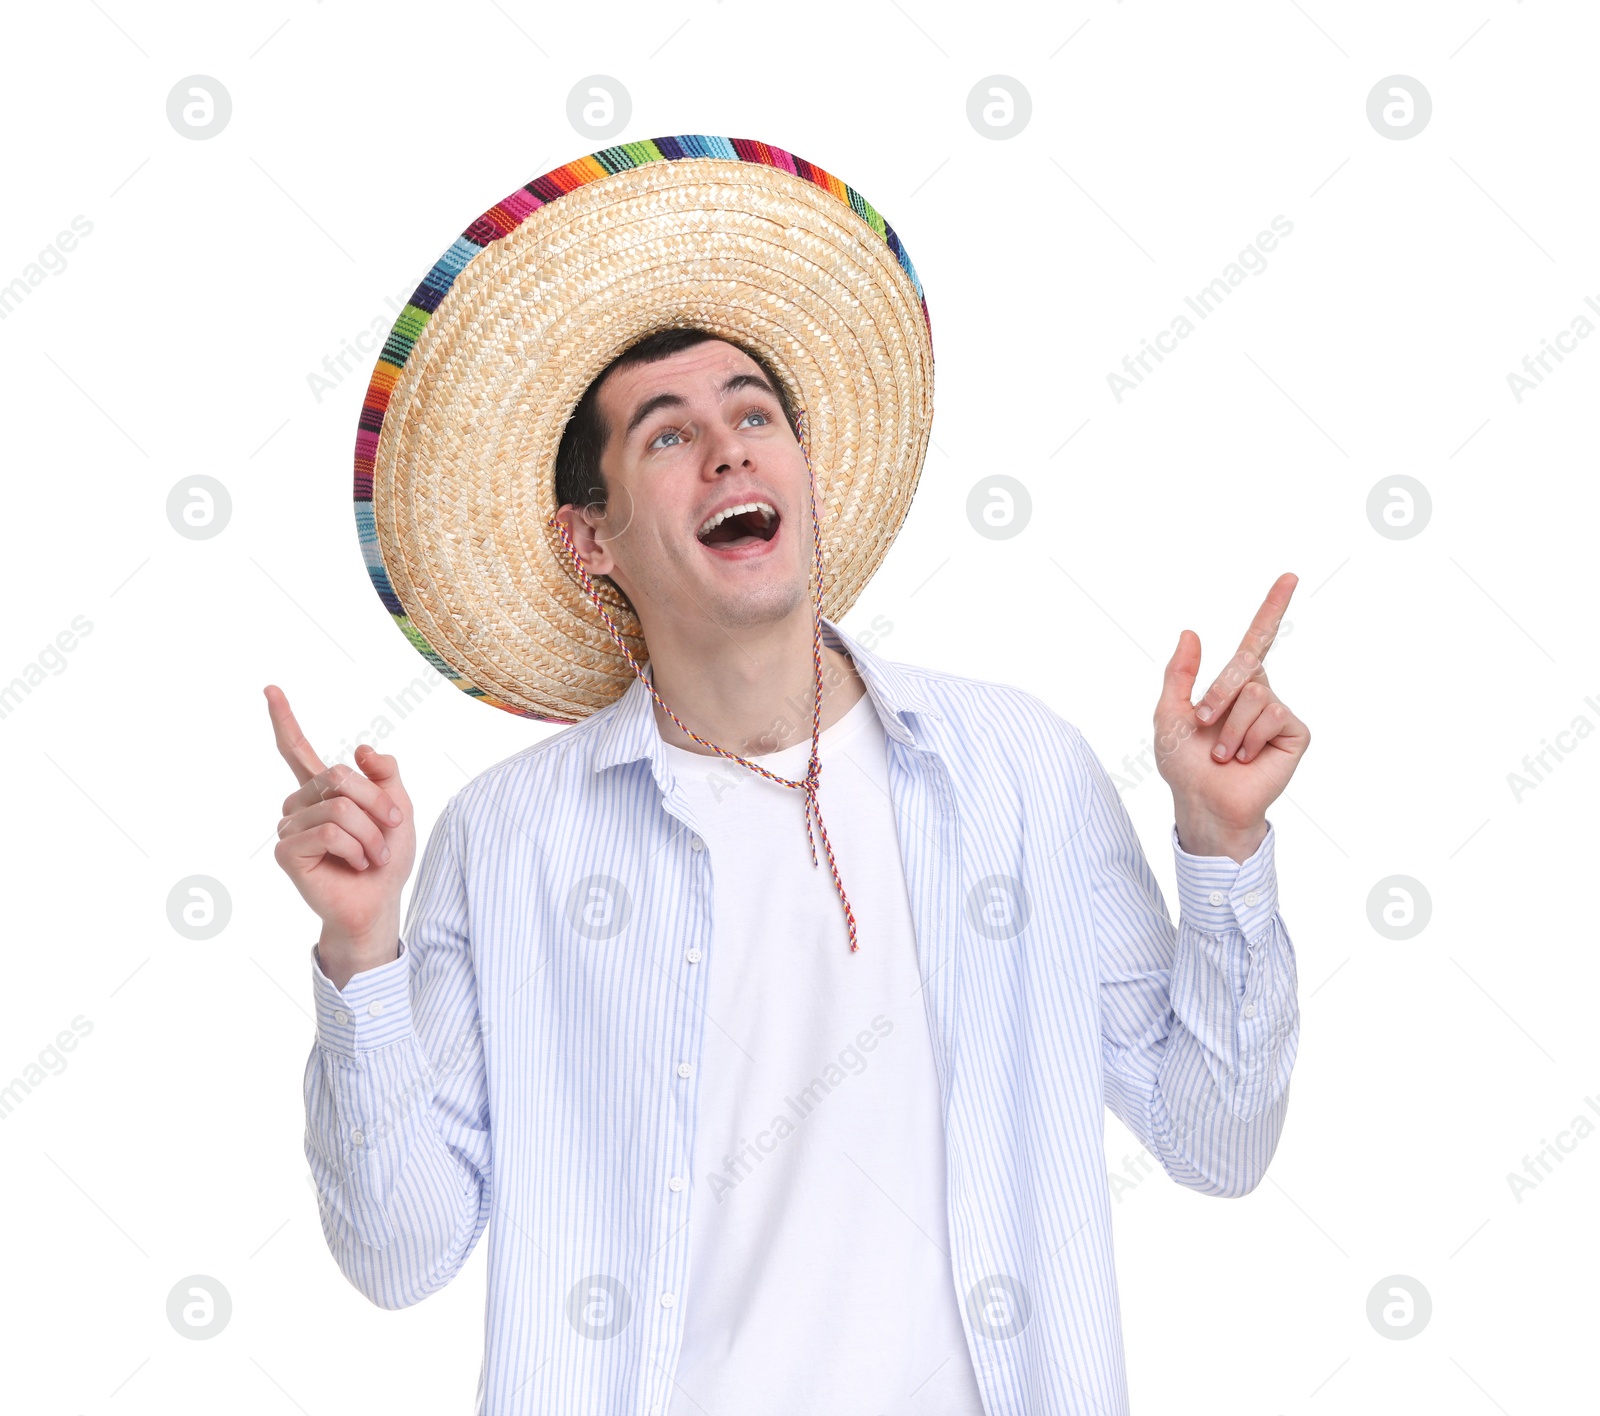 Photo of Young man in Mexican sombrero hat pointing at something on white background